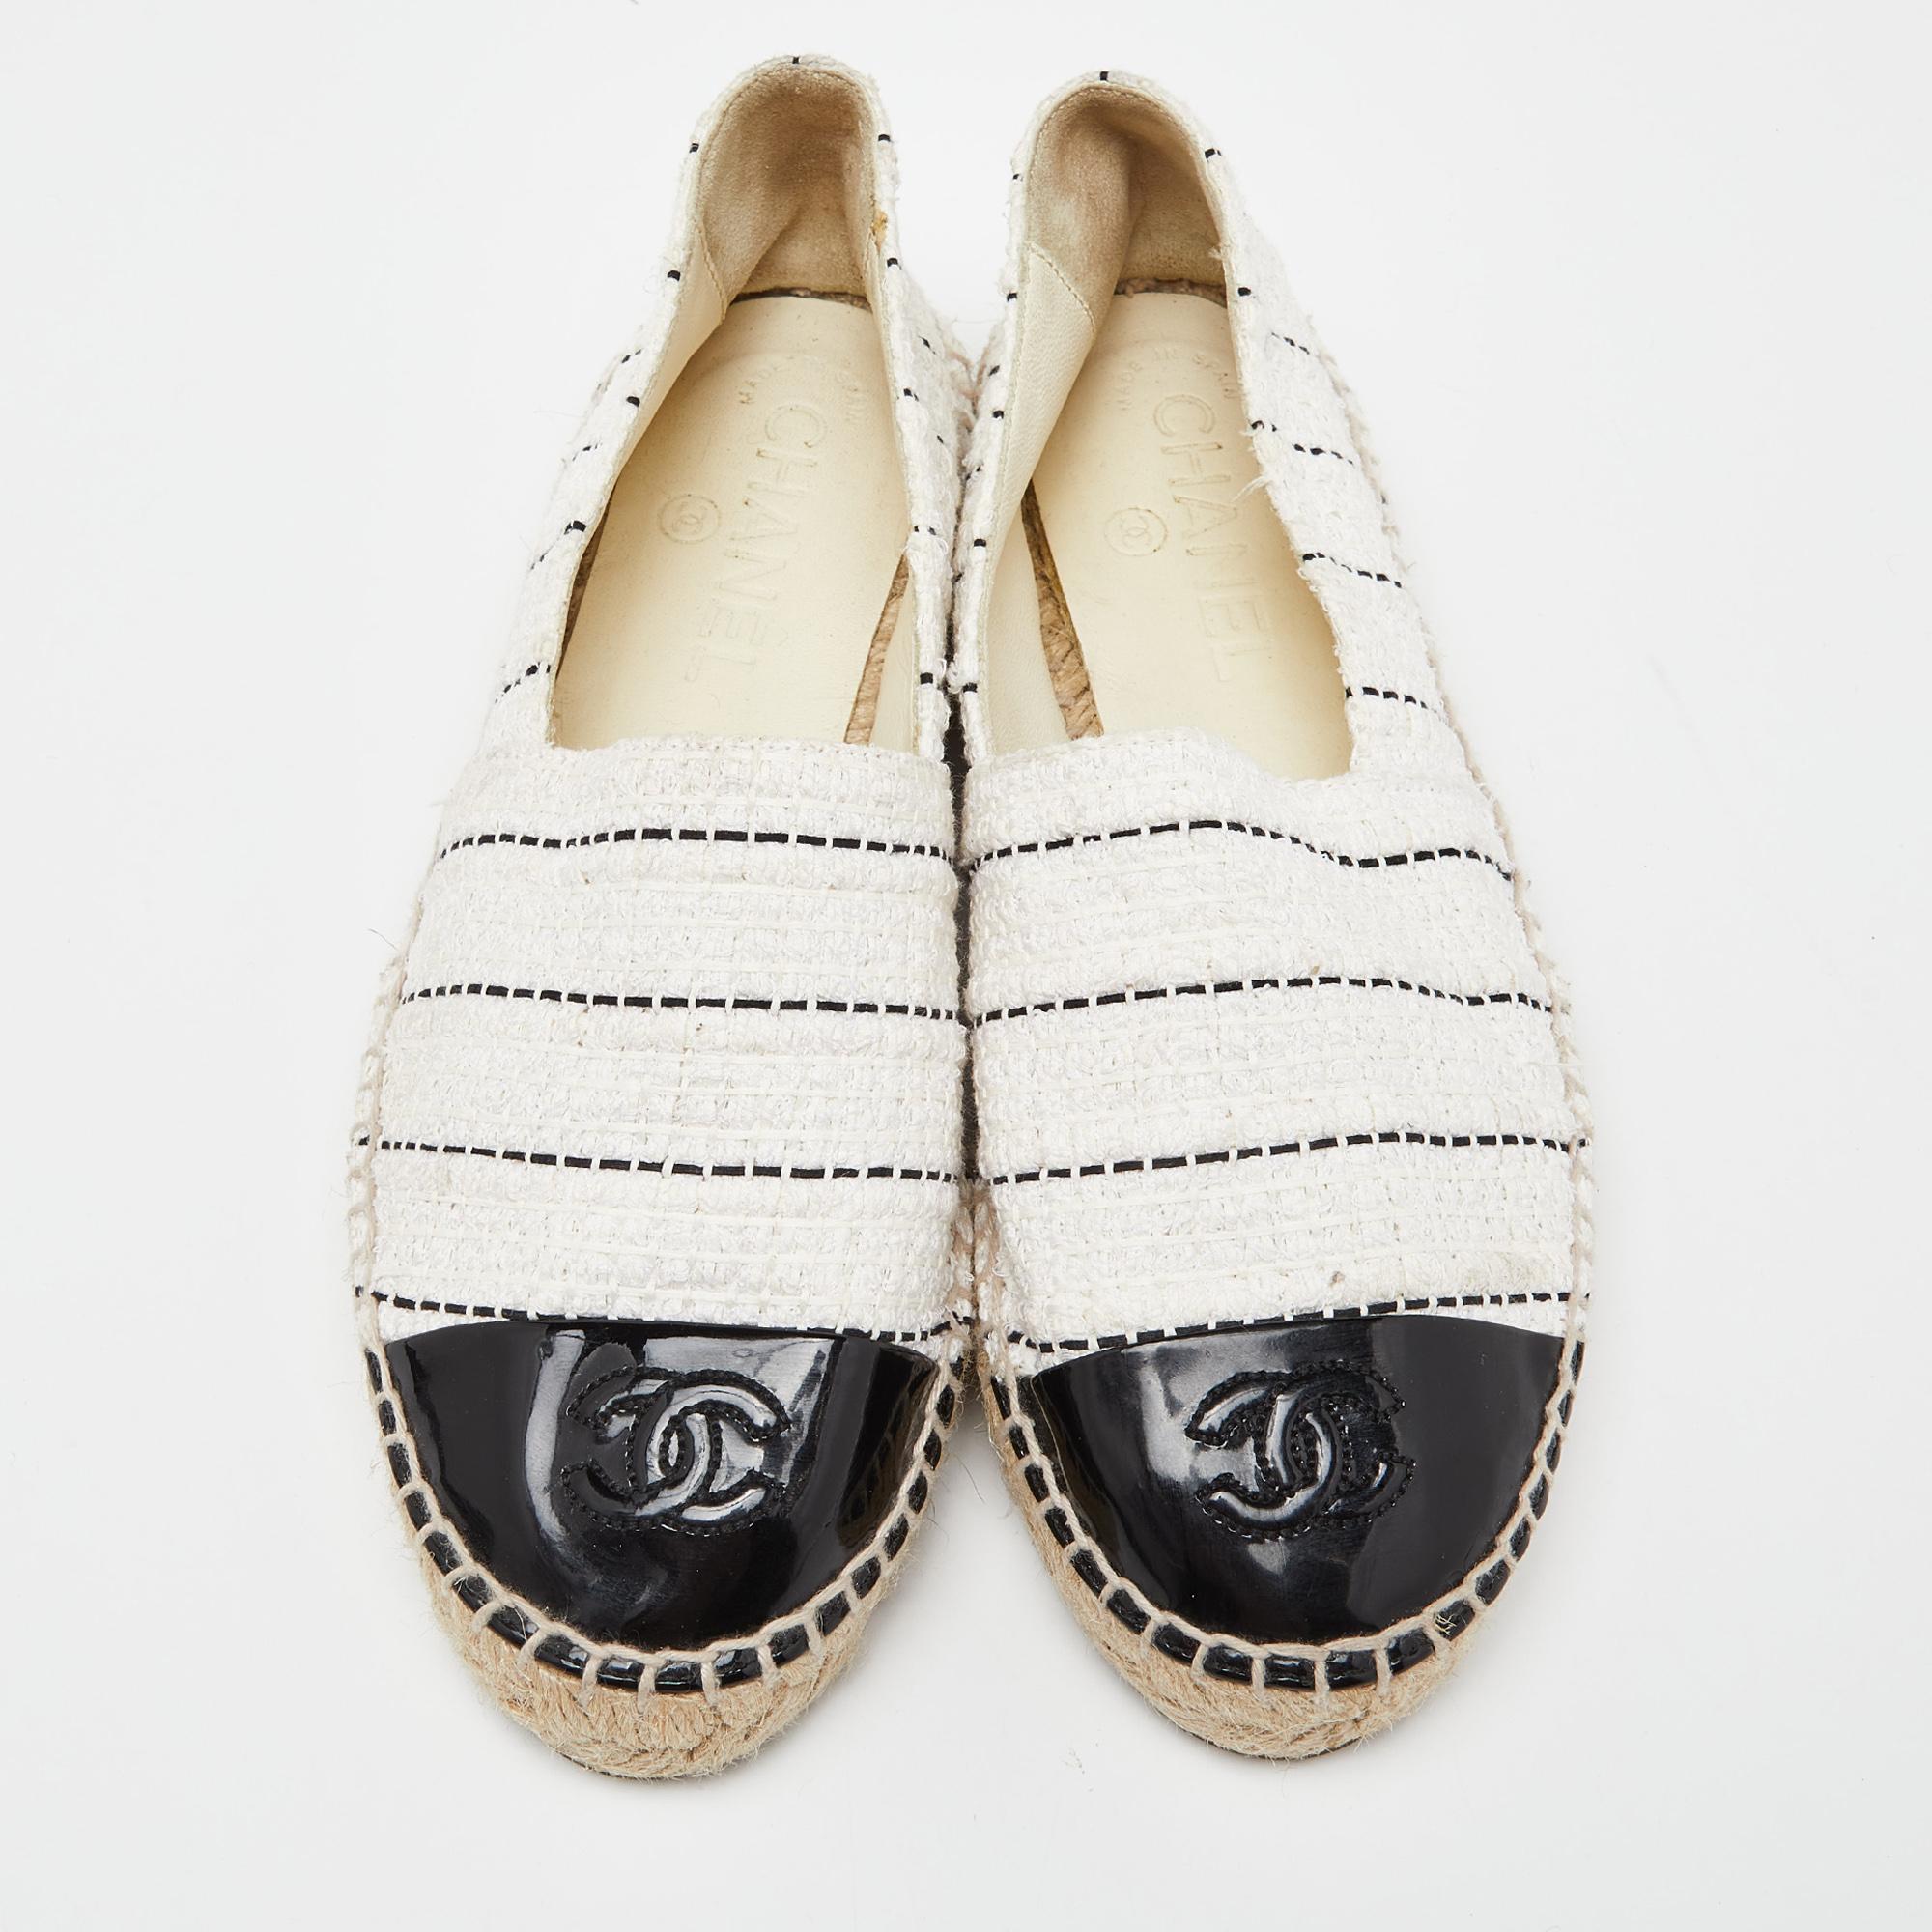 Let this comfortable pair be your first choice when you're out for a long day. These Chanel espadrille flats have well-sewn uppers beautifully set on durable soles.

